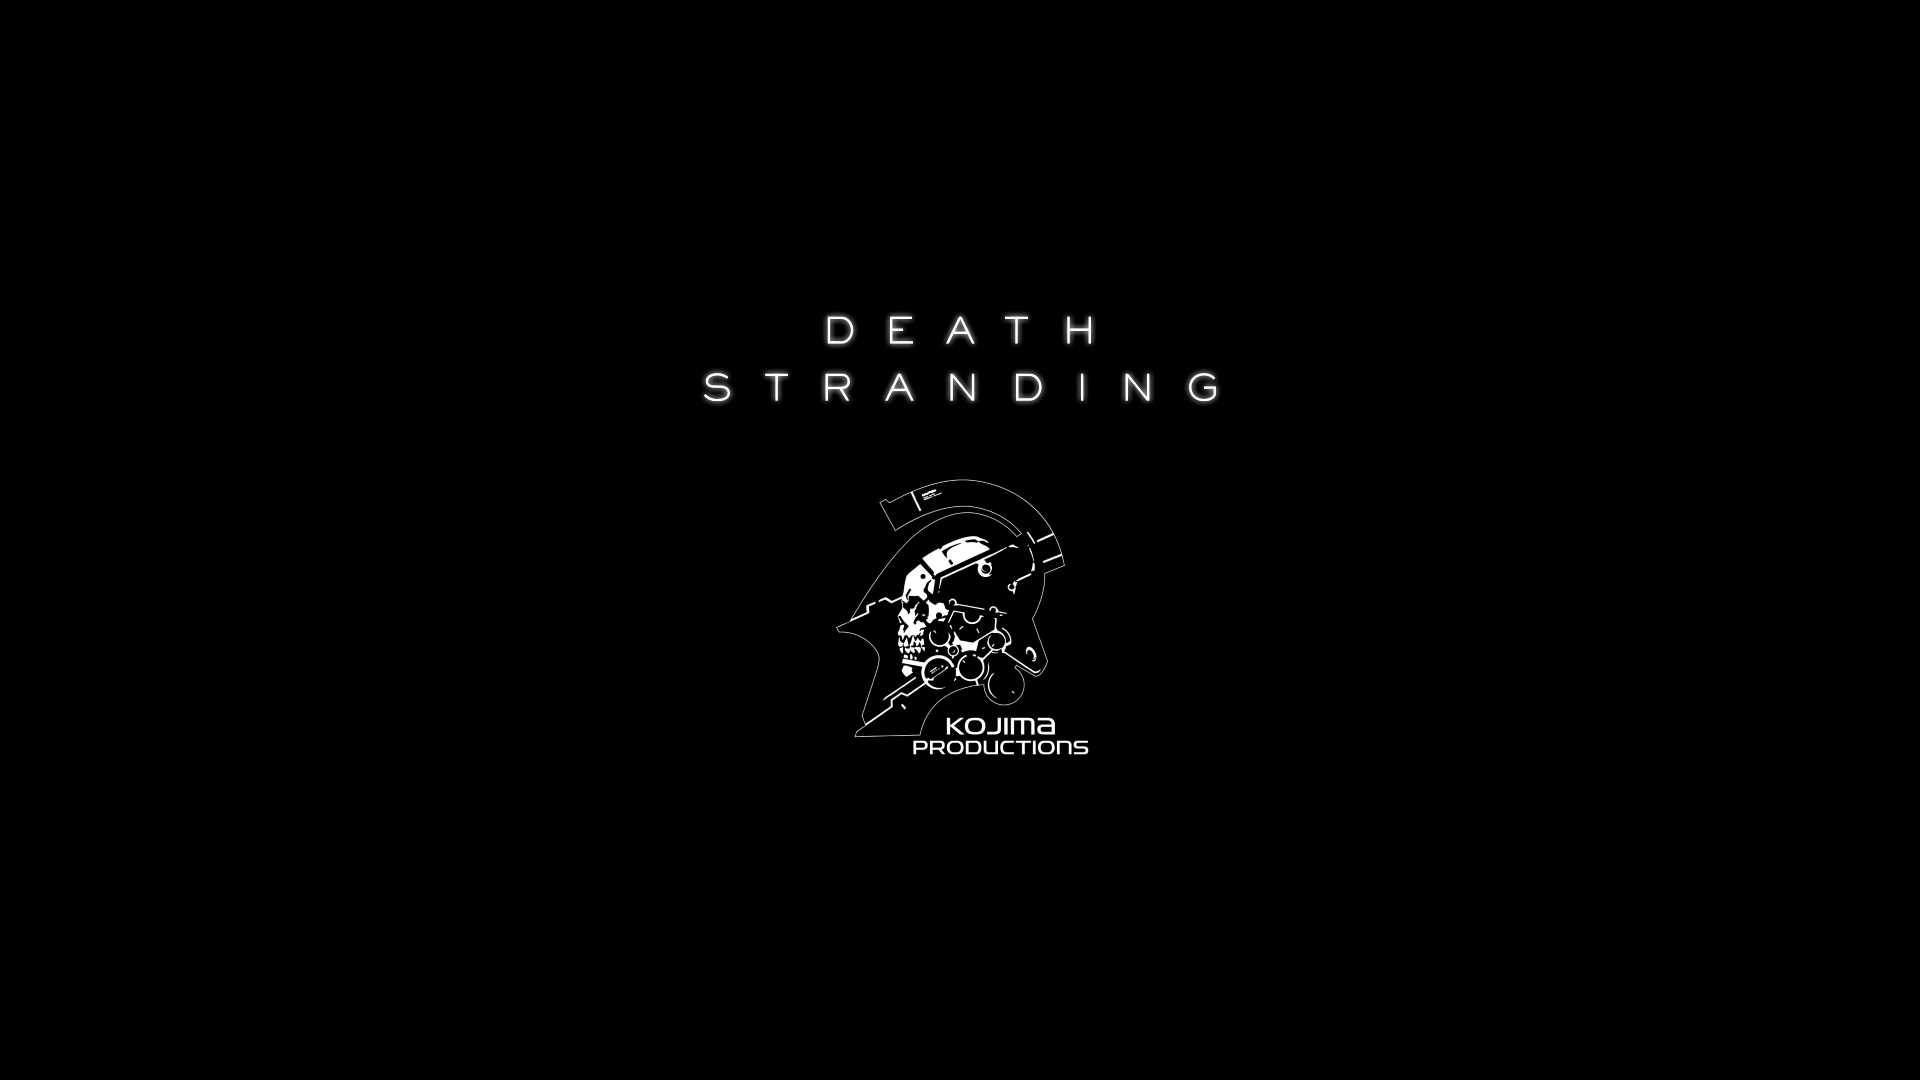 Download Death Stranding HD Wallpaper. Playstation, Xbox and PC